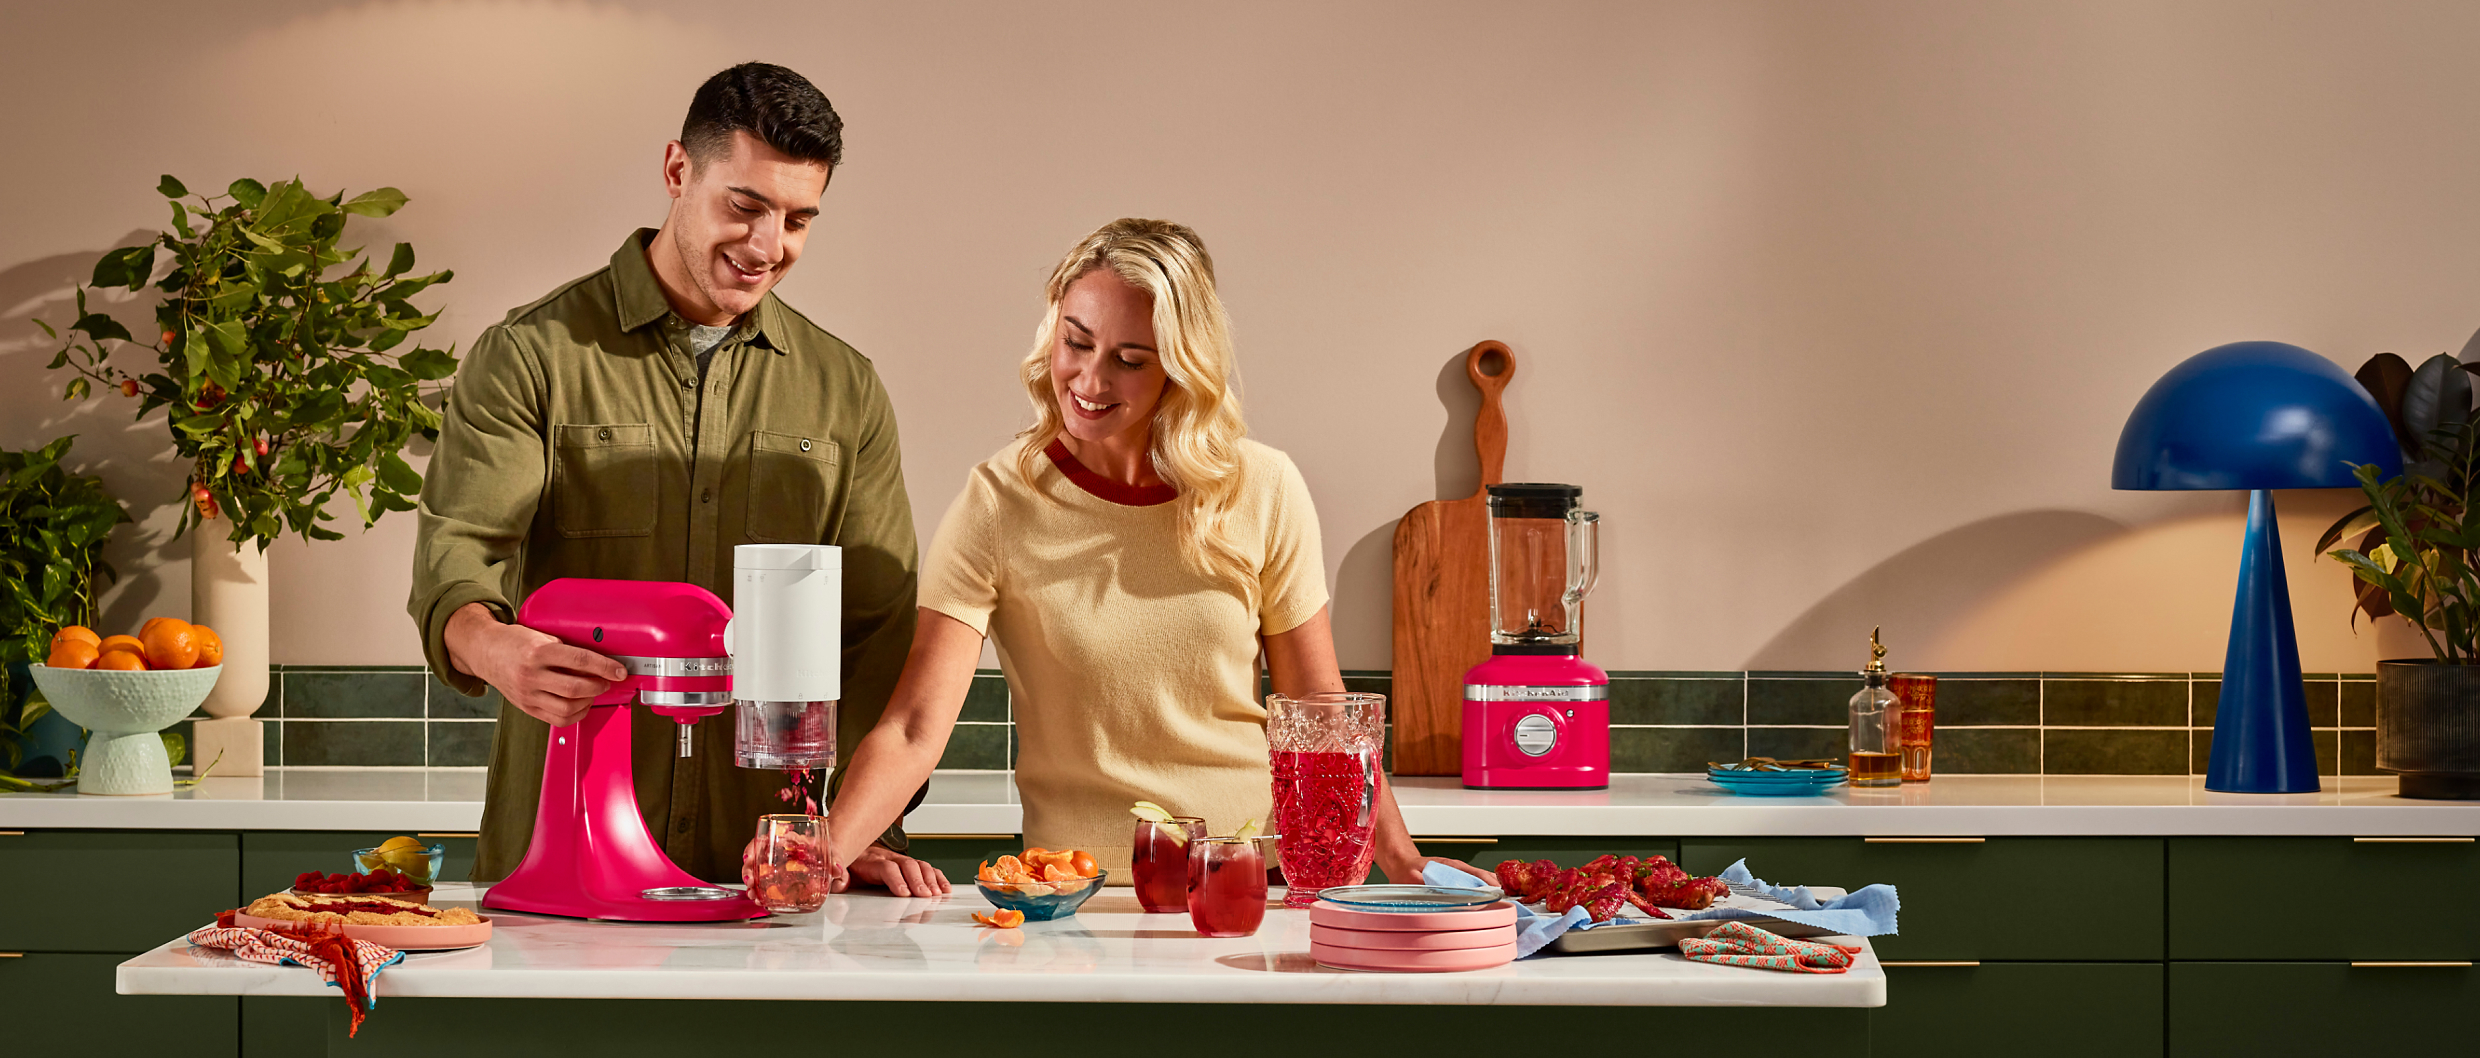 Unleash your inner baker with our KitchenAid dream team! Elevate